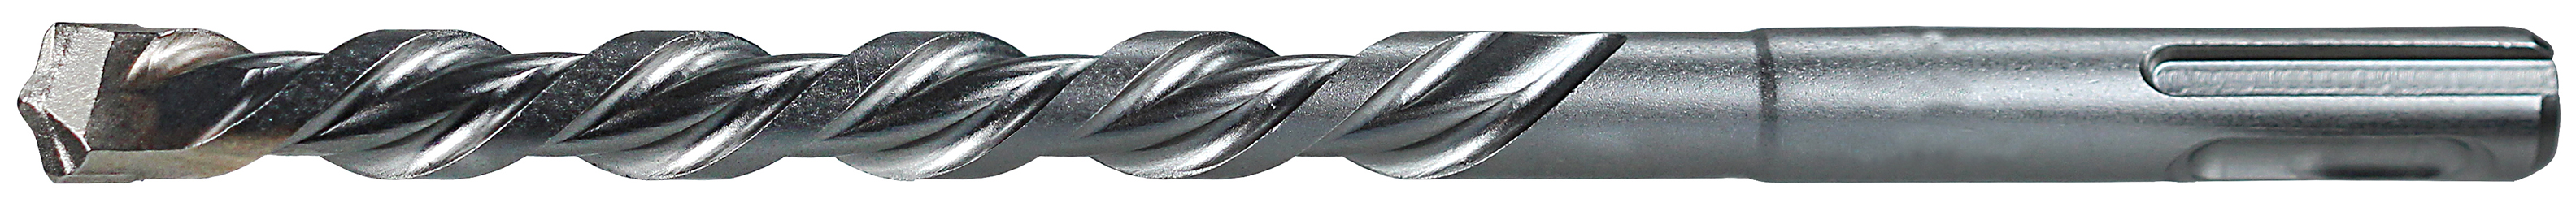 Rotary Hammer Drill Bit, 5/8 in. bit diameter, 6-1/4 in. overall length, Straight shank type, 3 flutes, Tip-Carbide material, 4 in. drilling depth